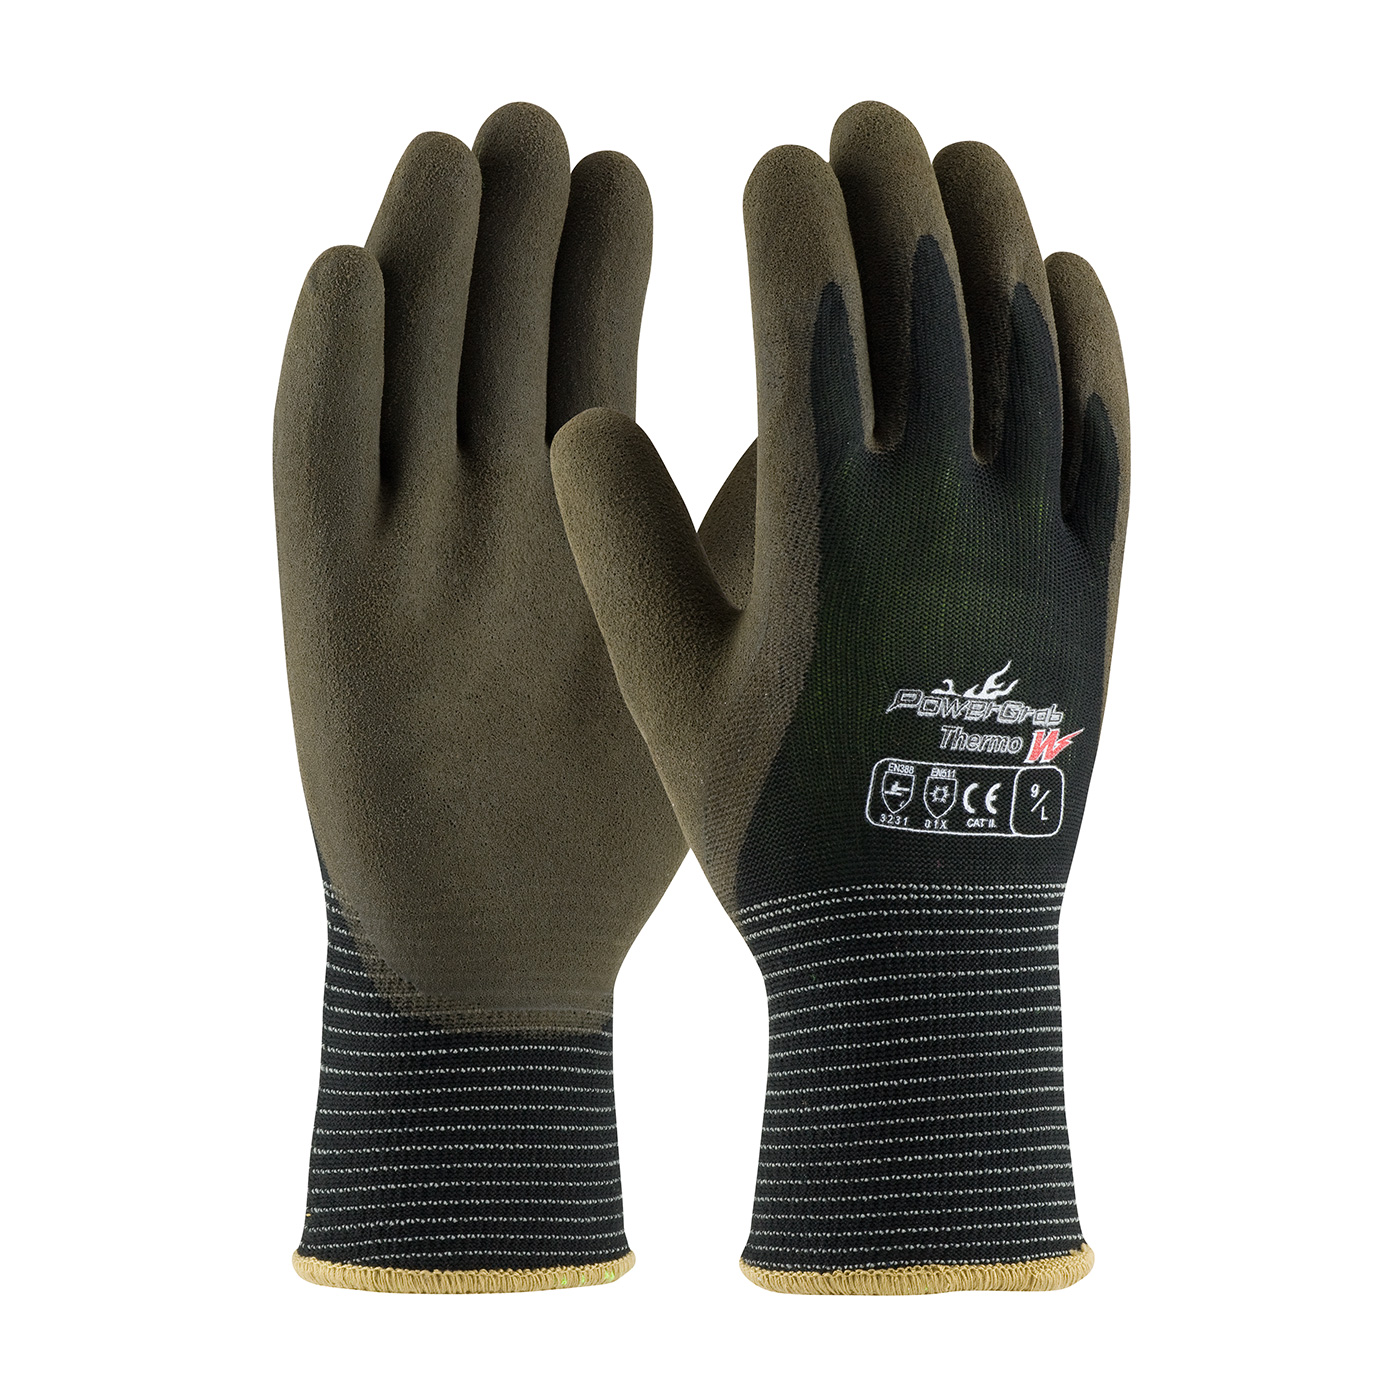 PIP 41-1430/XL PowerGrab Thermo W Seamless Knit Polyester Glove with Acrylic Liner and Latex MicroFinish Grip on Palm & Fingers - X-Large PID-41 1430 XL